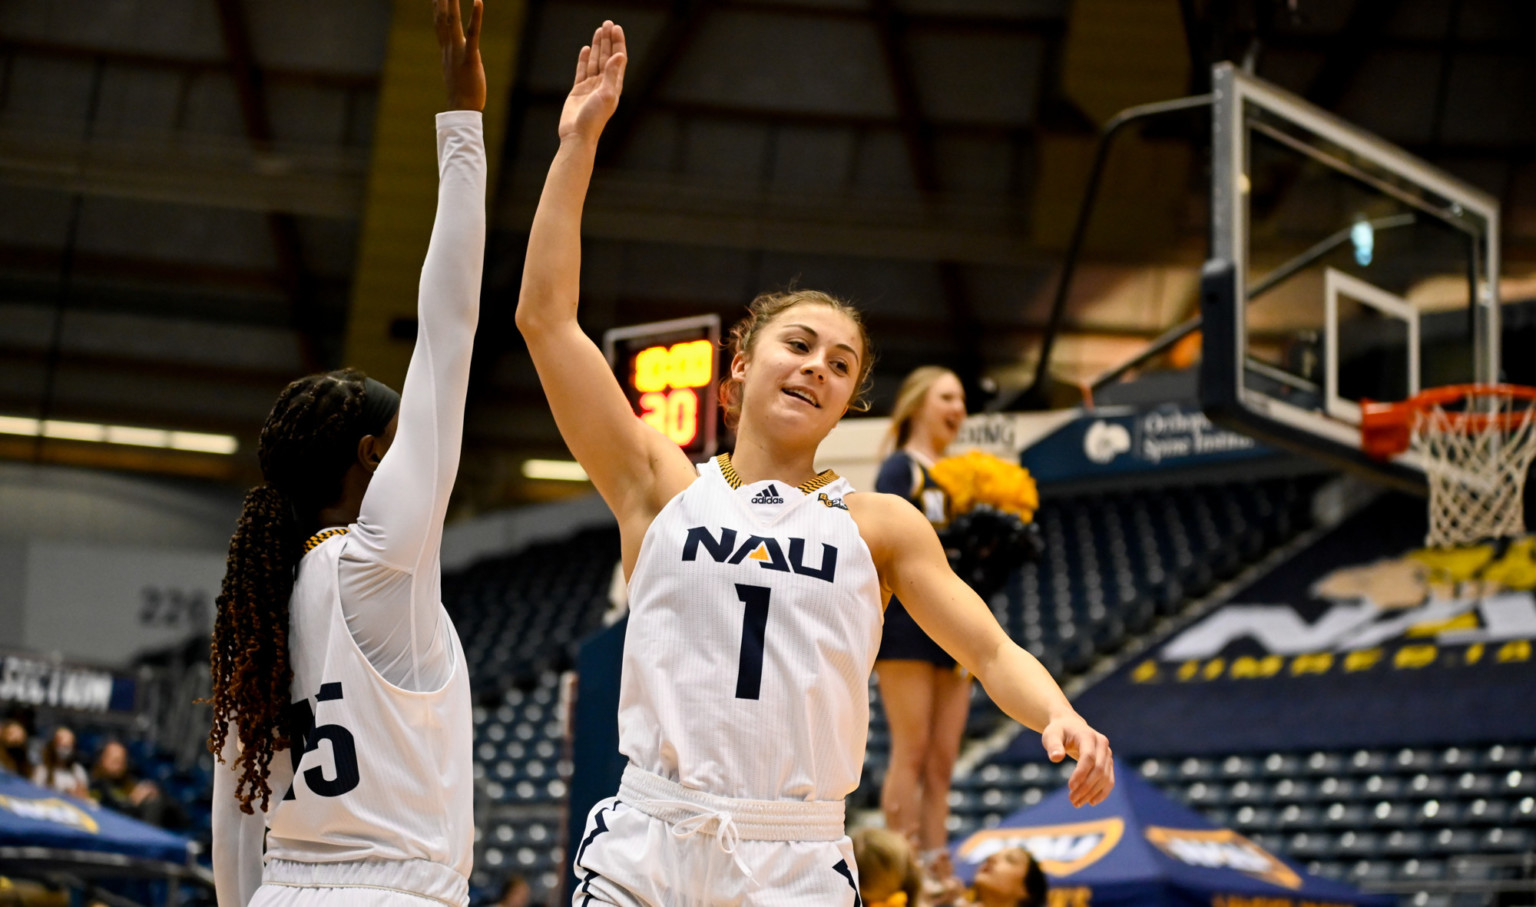 Northern Arizona University female student athlete high fiving during basketball game on court basket upper right